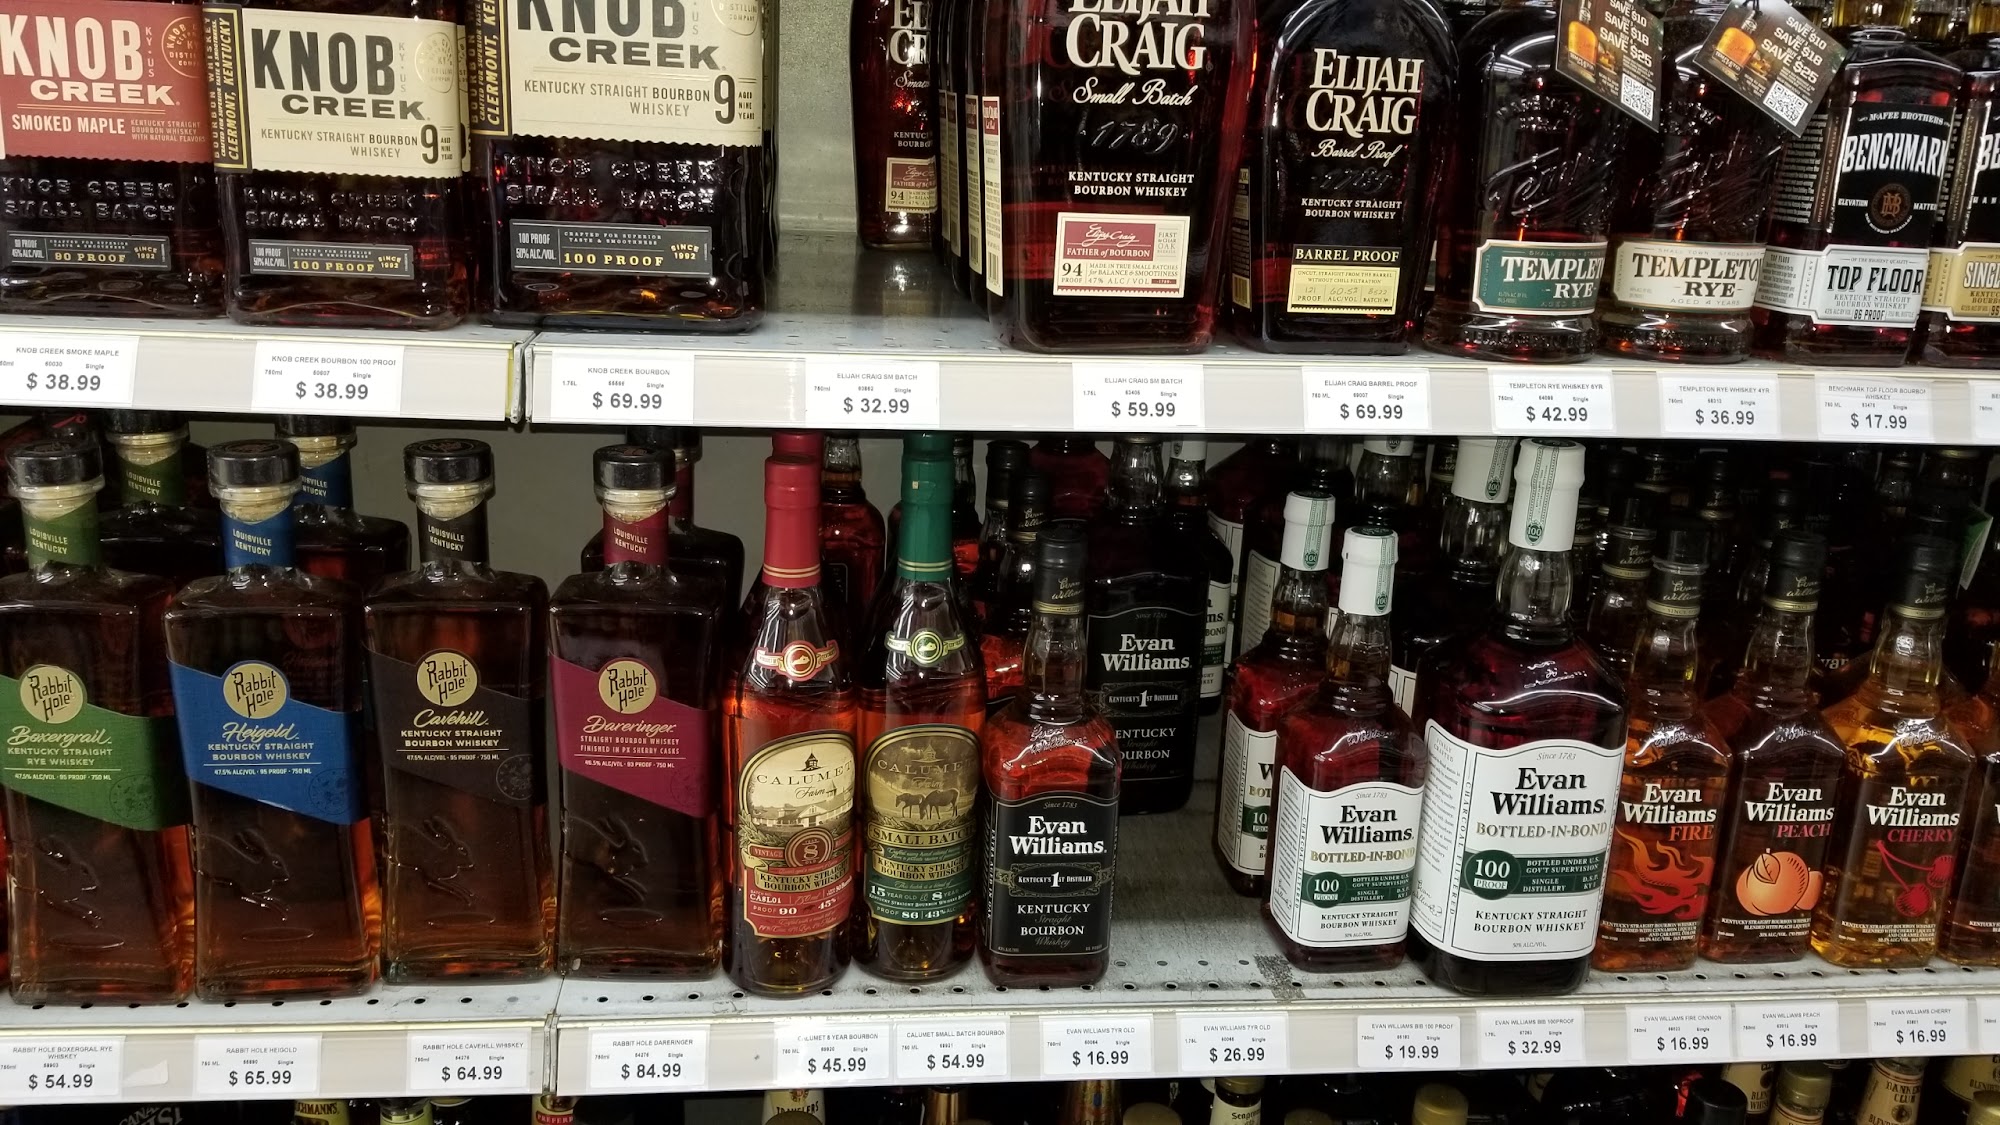 Canal's Discount Liquor Mart 411 N White Horse Pike, Laurel Springs New Jersey 08021